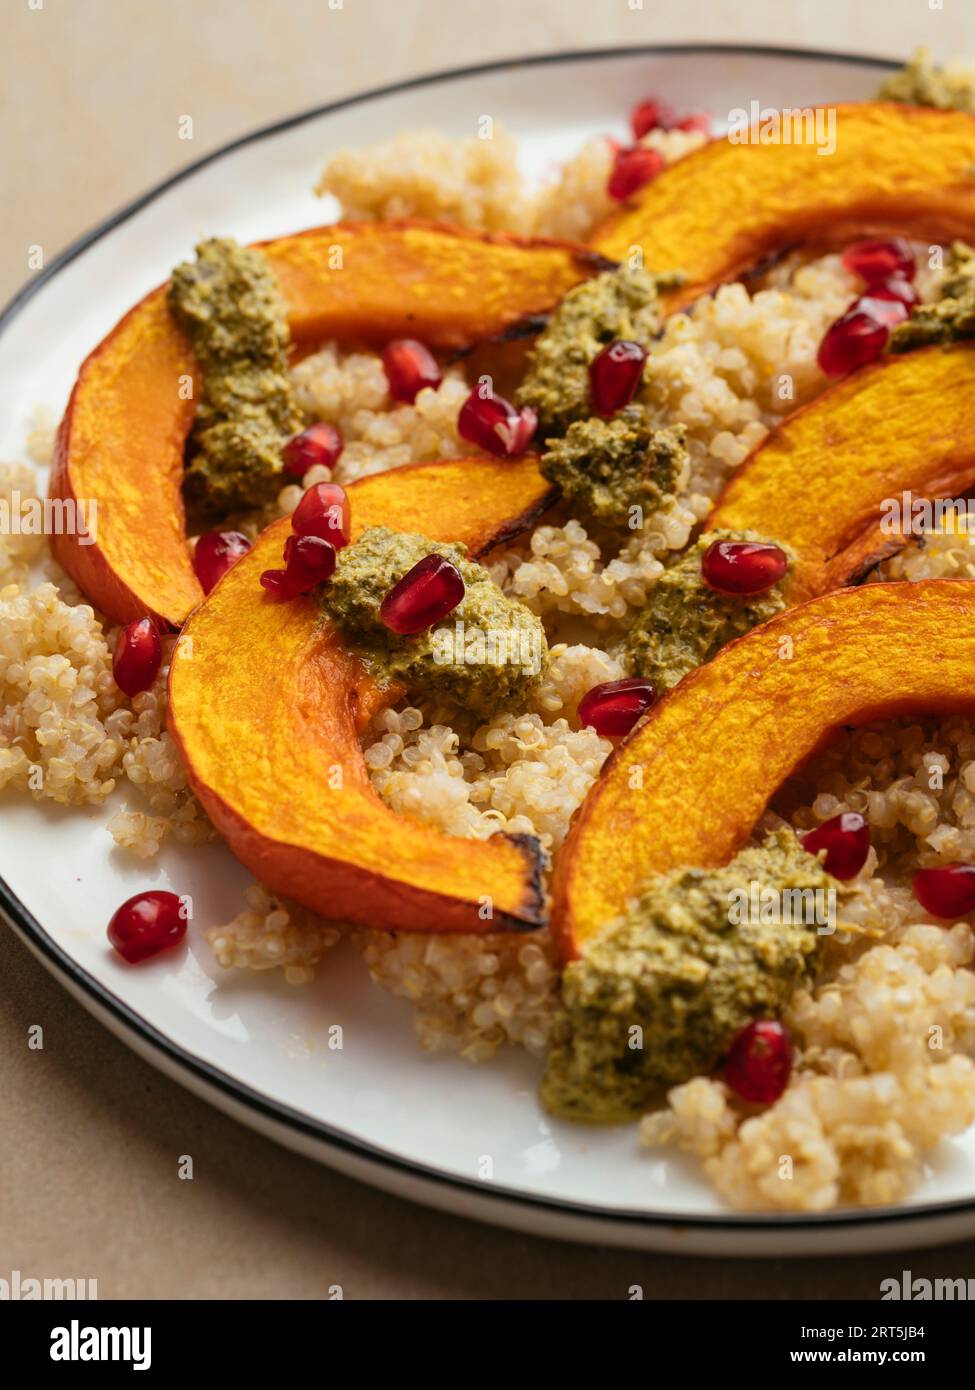 Home made roasted winter squash with quinoa and mint pesto, garnished with pomegranate arils. Stock Photo